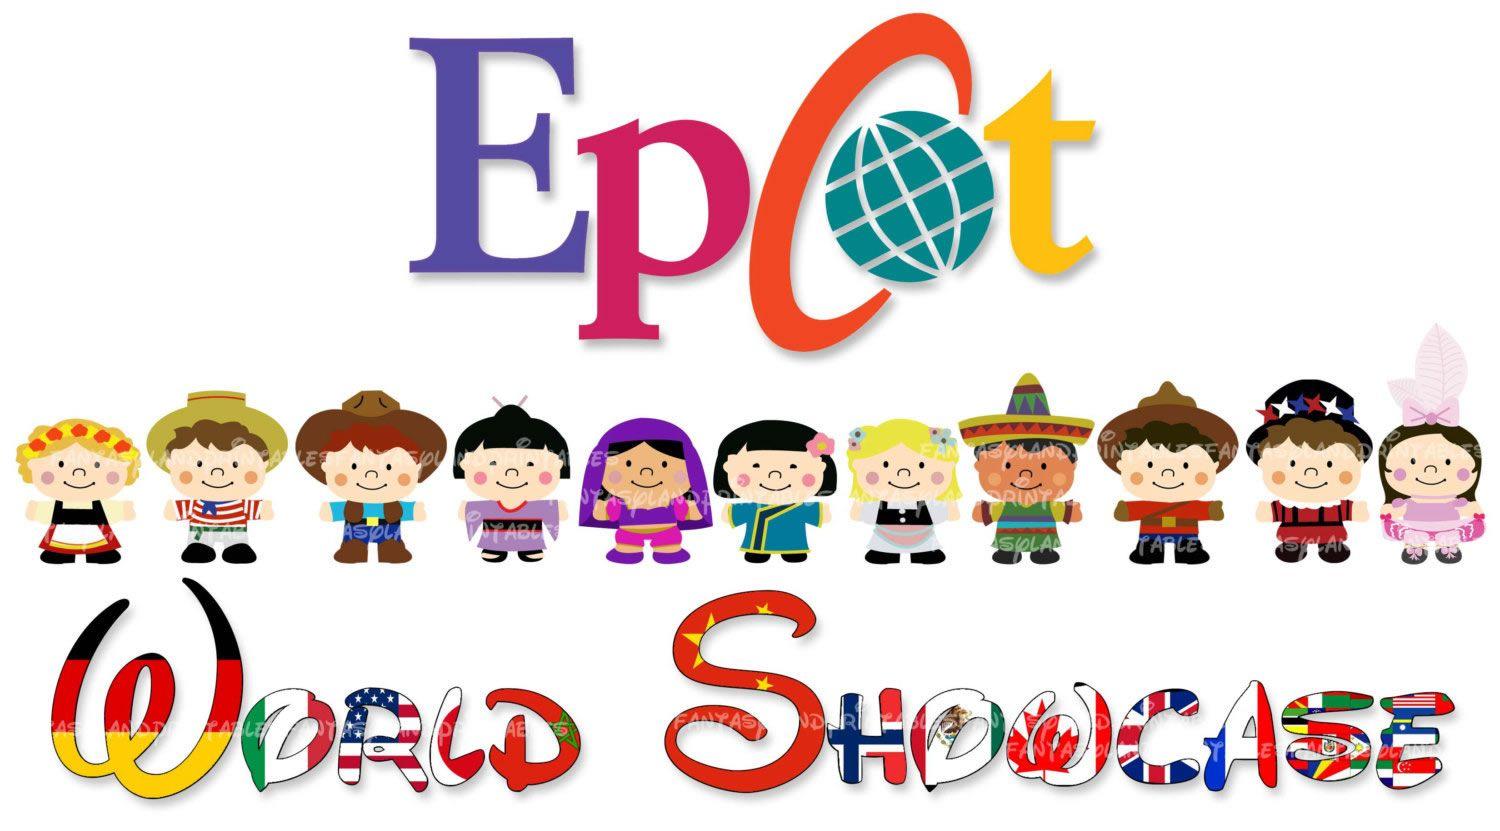 Walt Disney World Epcot Logo - Epcot Logo Png (98+ images in Collection) Page 3